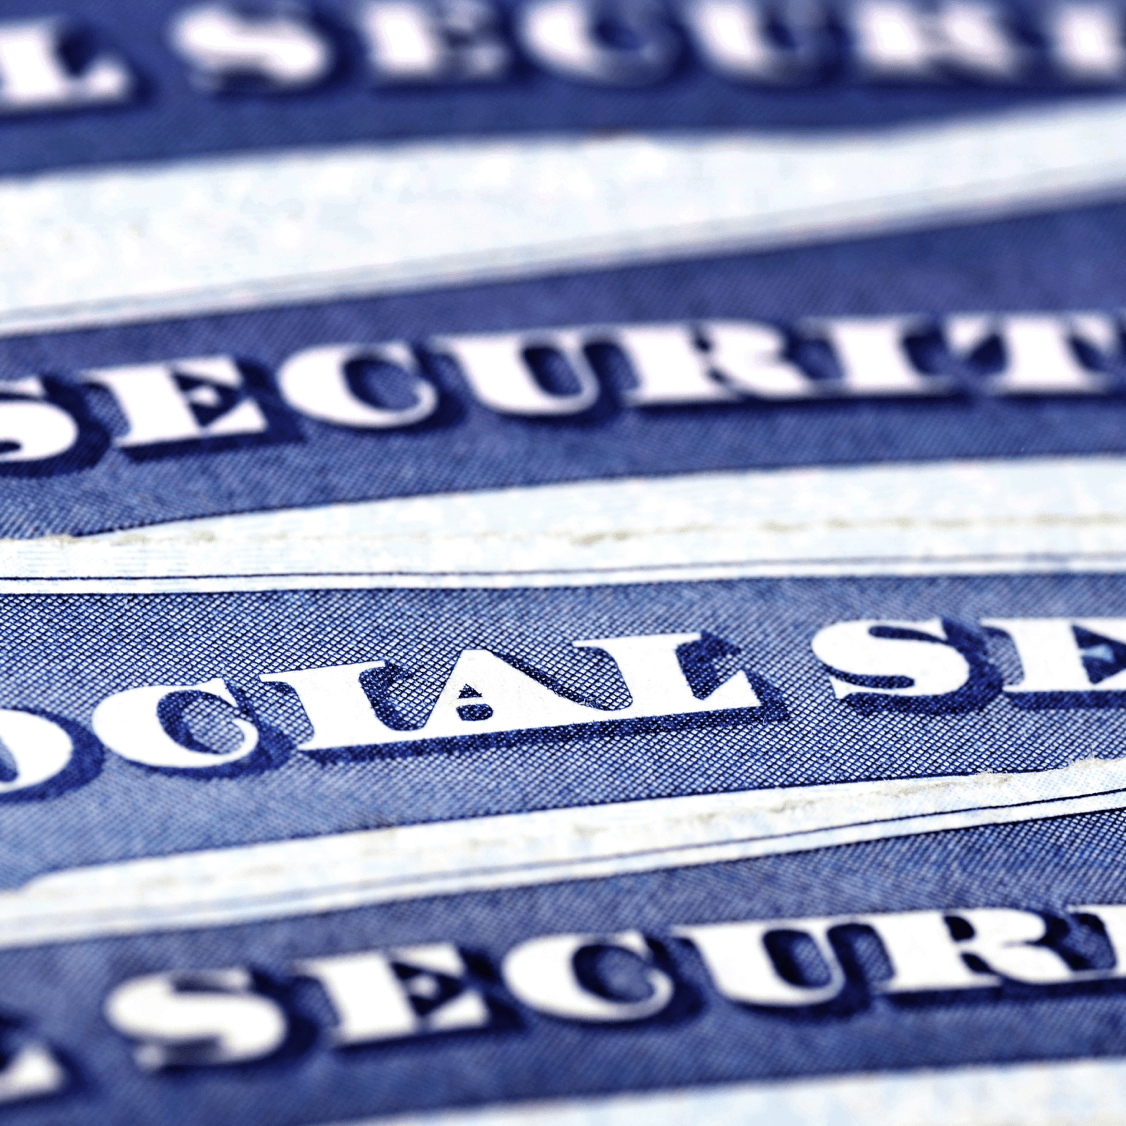 Image of You are paying into it now, but how much will you make from Social Security? Here’s how it is calculated & the factors affecting your eventual payout.